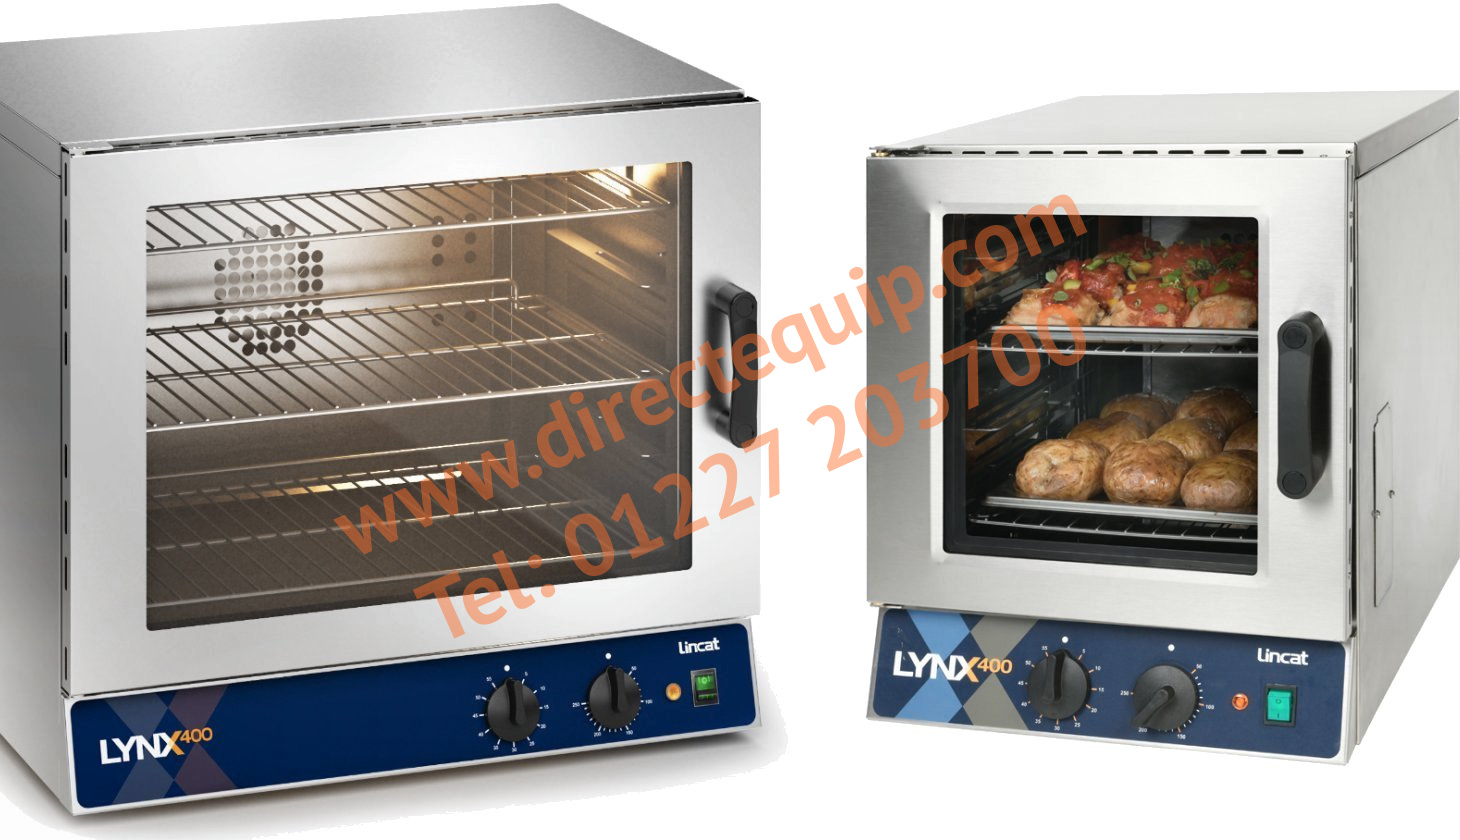 Lynx 400 LCOS, LCOT, LCOXL Convection Ovens